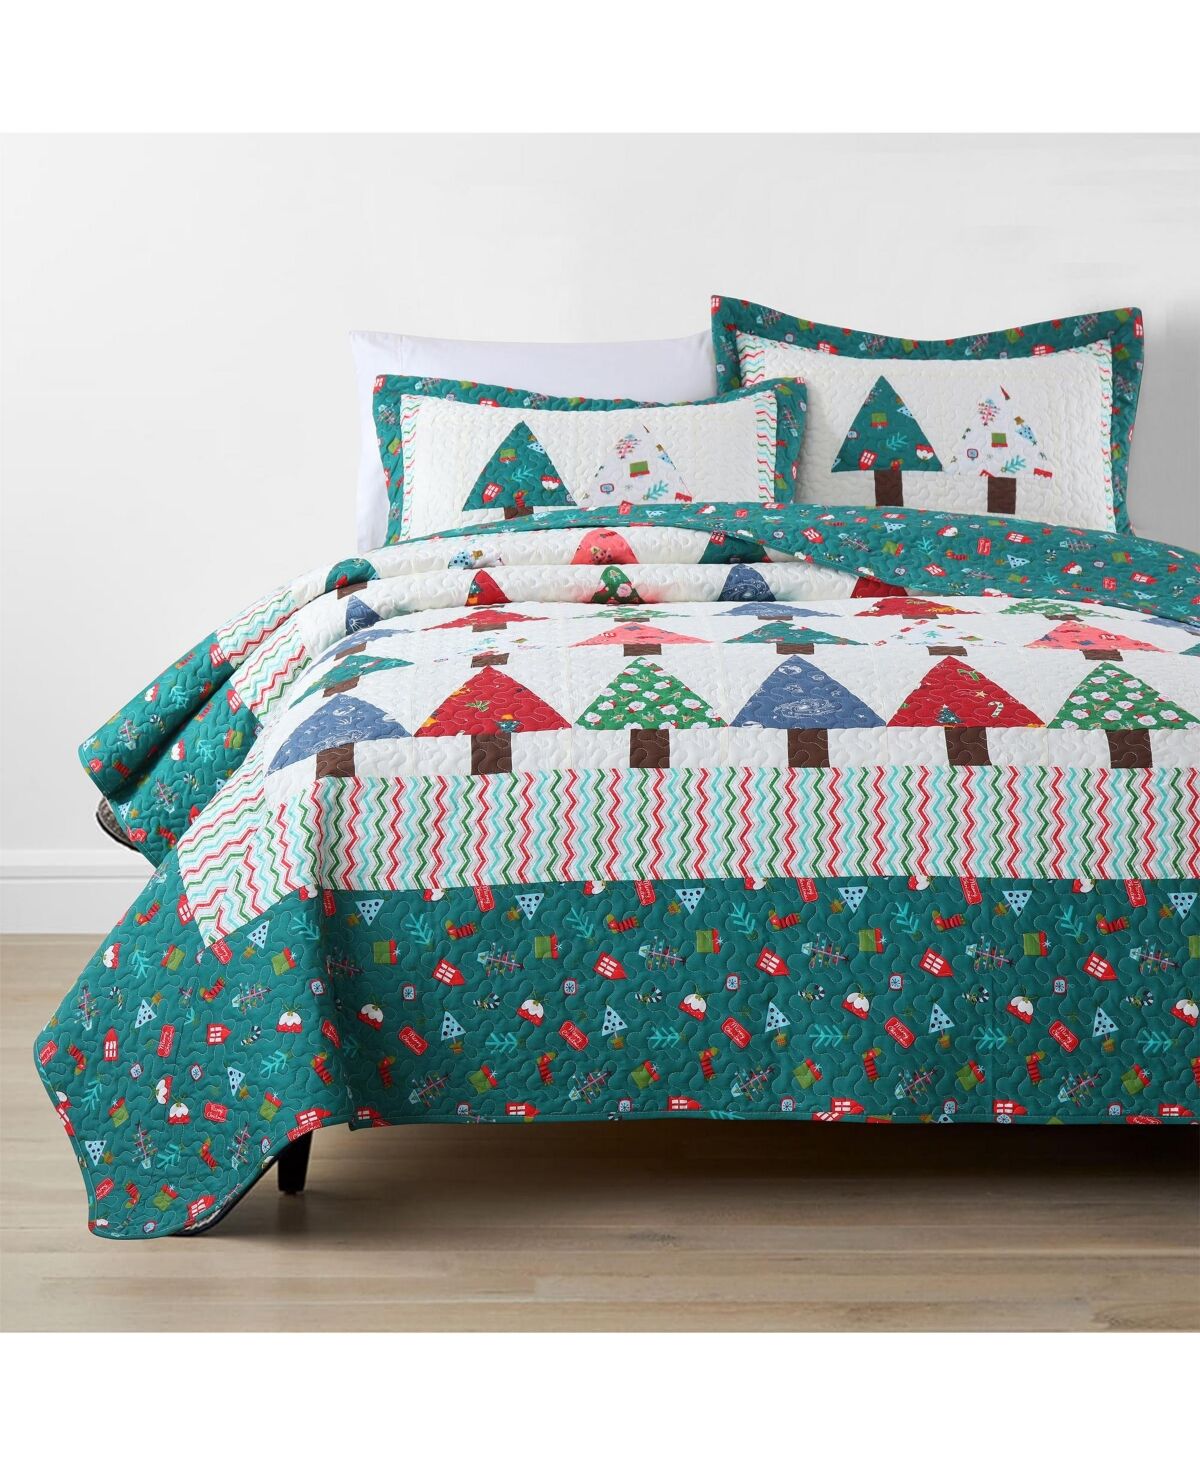 MarCielo 3Pcs Handcrafted Christmas Patchwork Cotton Vintage Like Style Holiday Bedspread Set - King - Blue